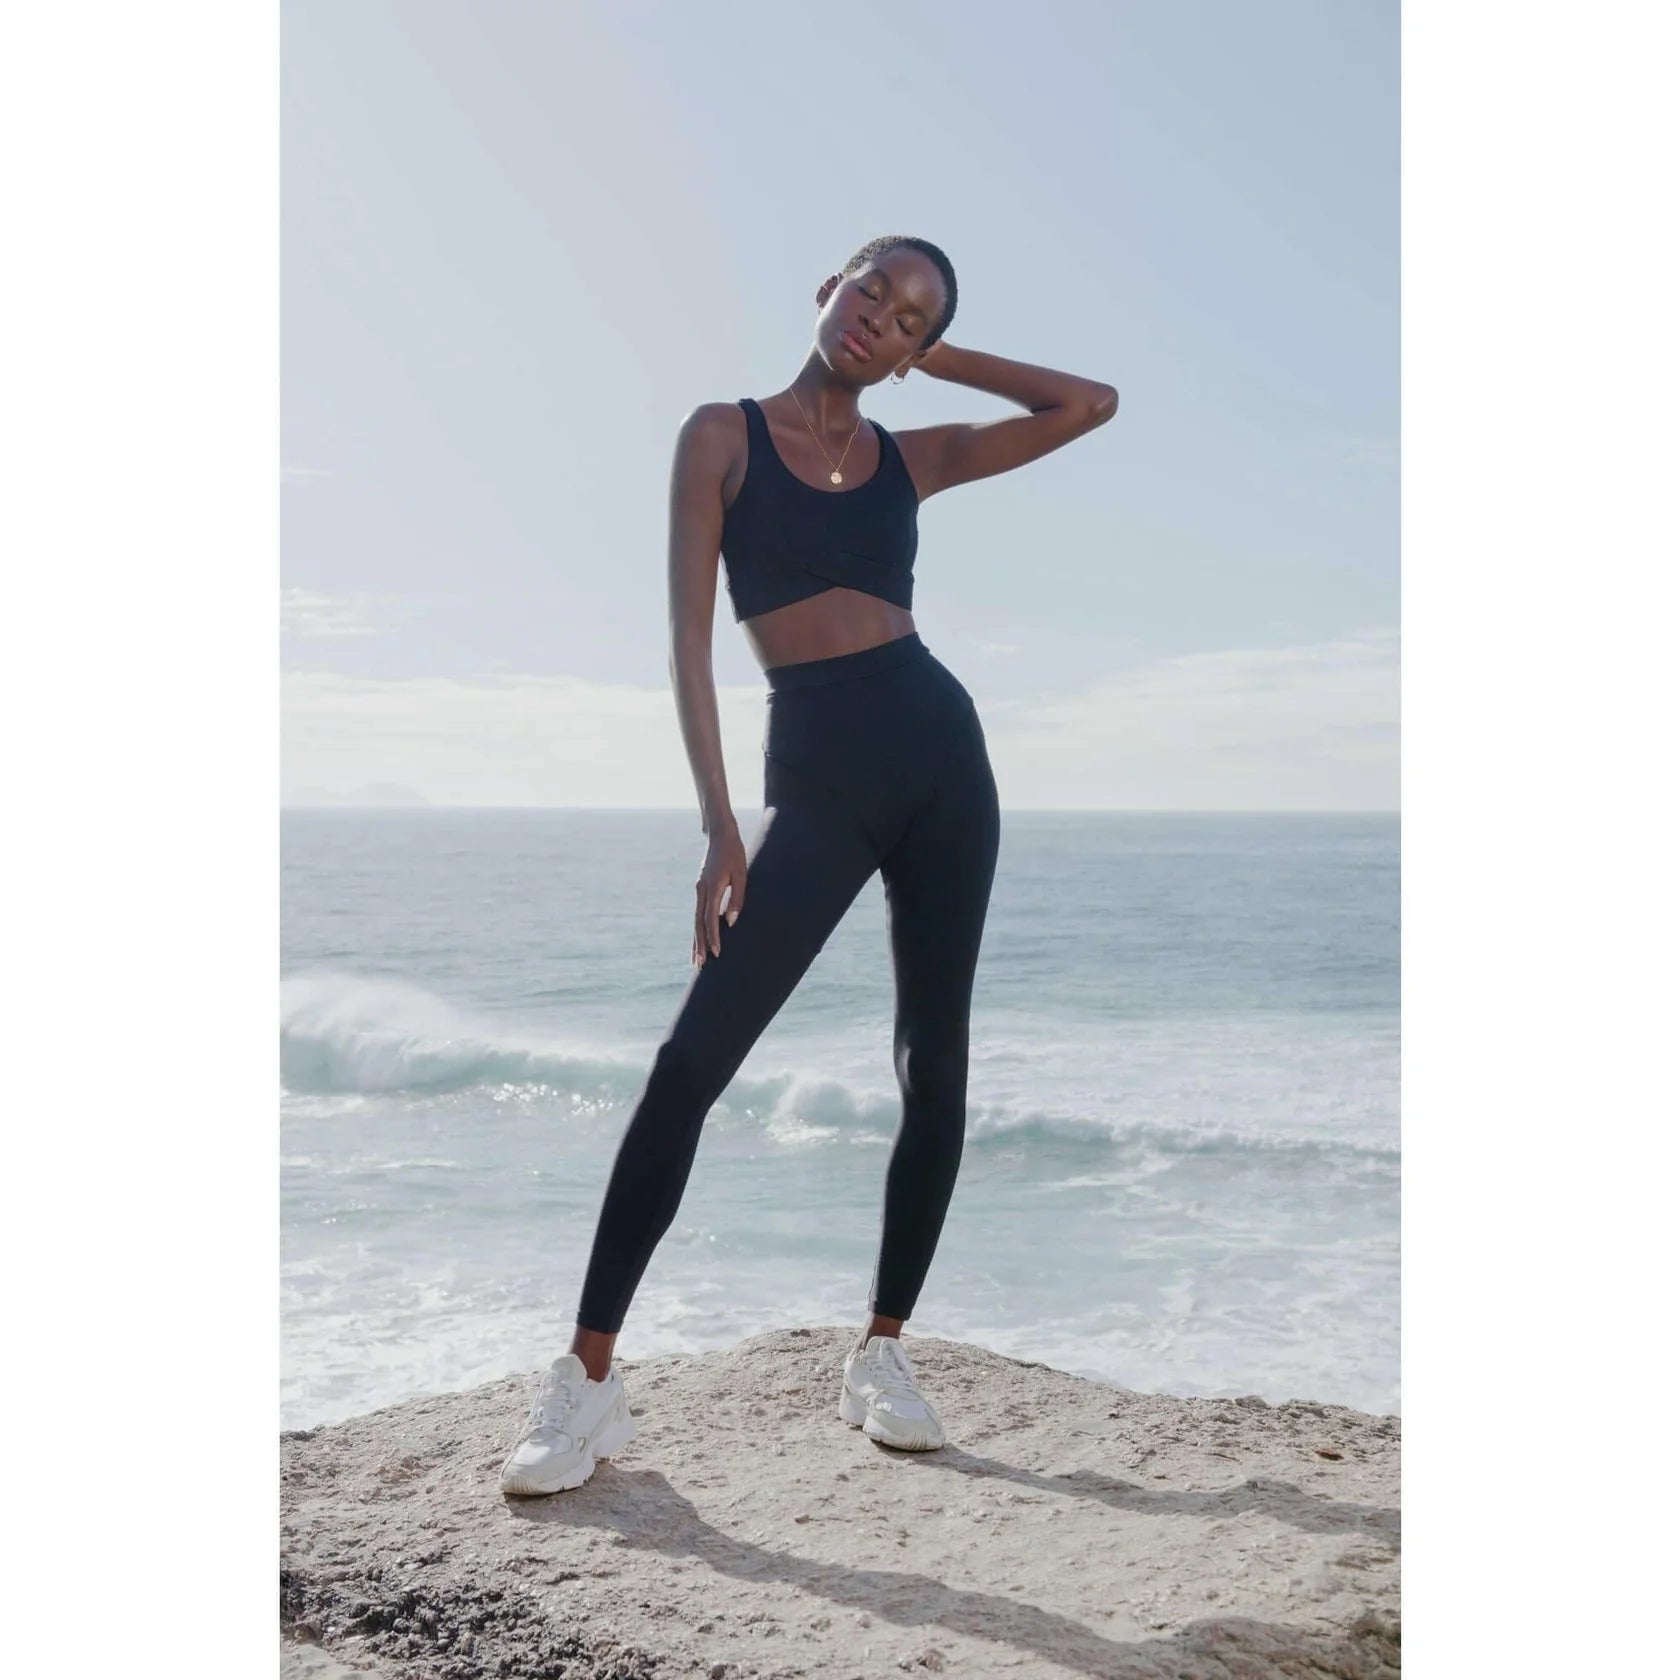 F.LUX Bruna sports bra. With a sexy v at the back and the cross over fabric with front, this is the most versatile activewear top on the market.